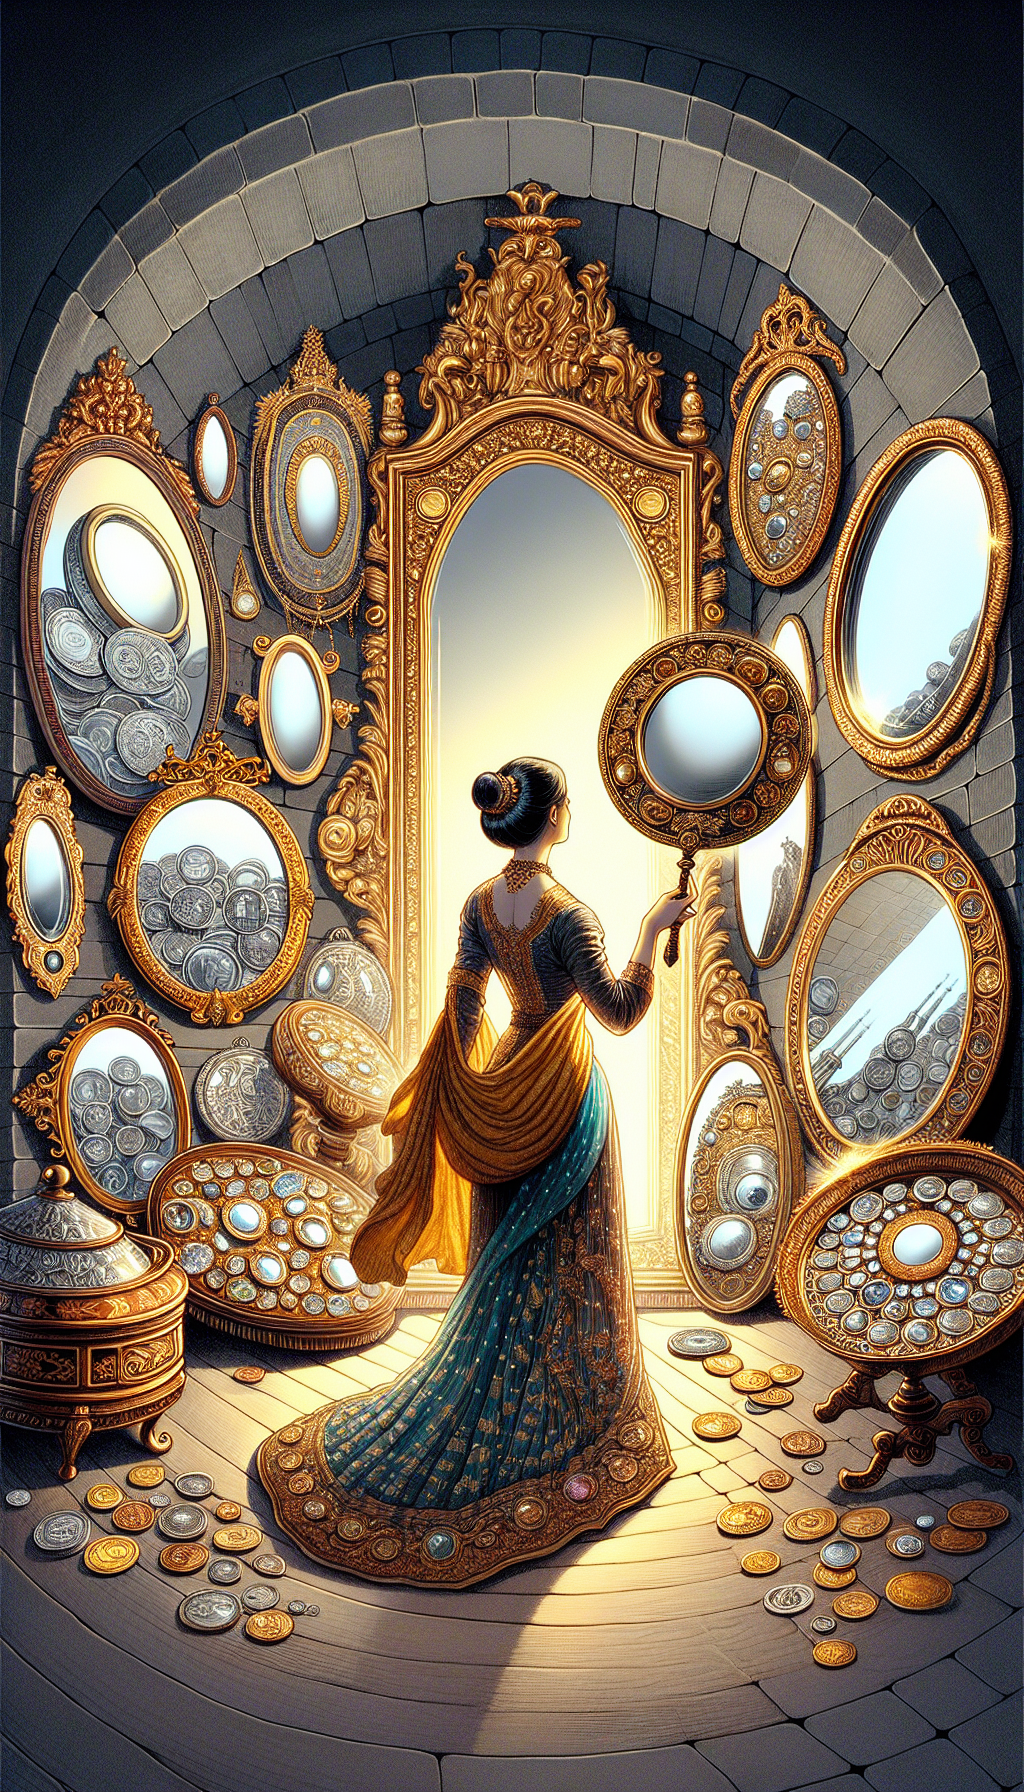 A whimsical illustration featuring a collage of antique mirrors in various historic styles—Baroque, Rococo, Victorian—each reflecting coins and gemstones instead of people, symbolizing their value. At the center, a person peers through a large, ornate looking glass, framed by intricate motifs, highlighting the discovery of the era and style of each mirror piece, as they step into a past age of elegance.